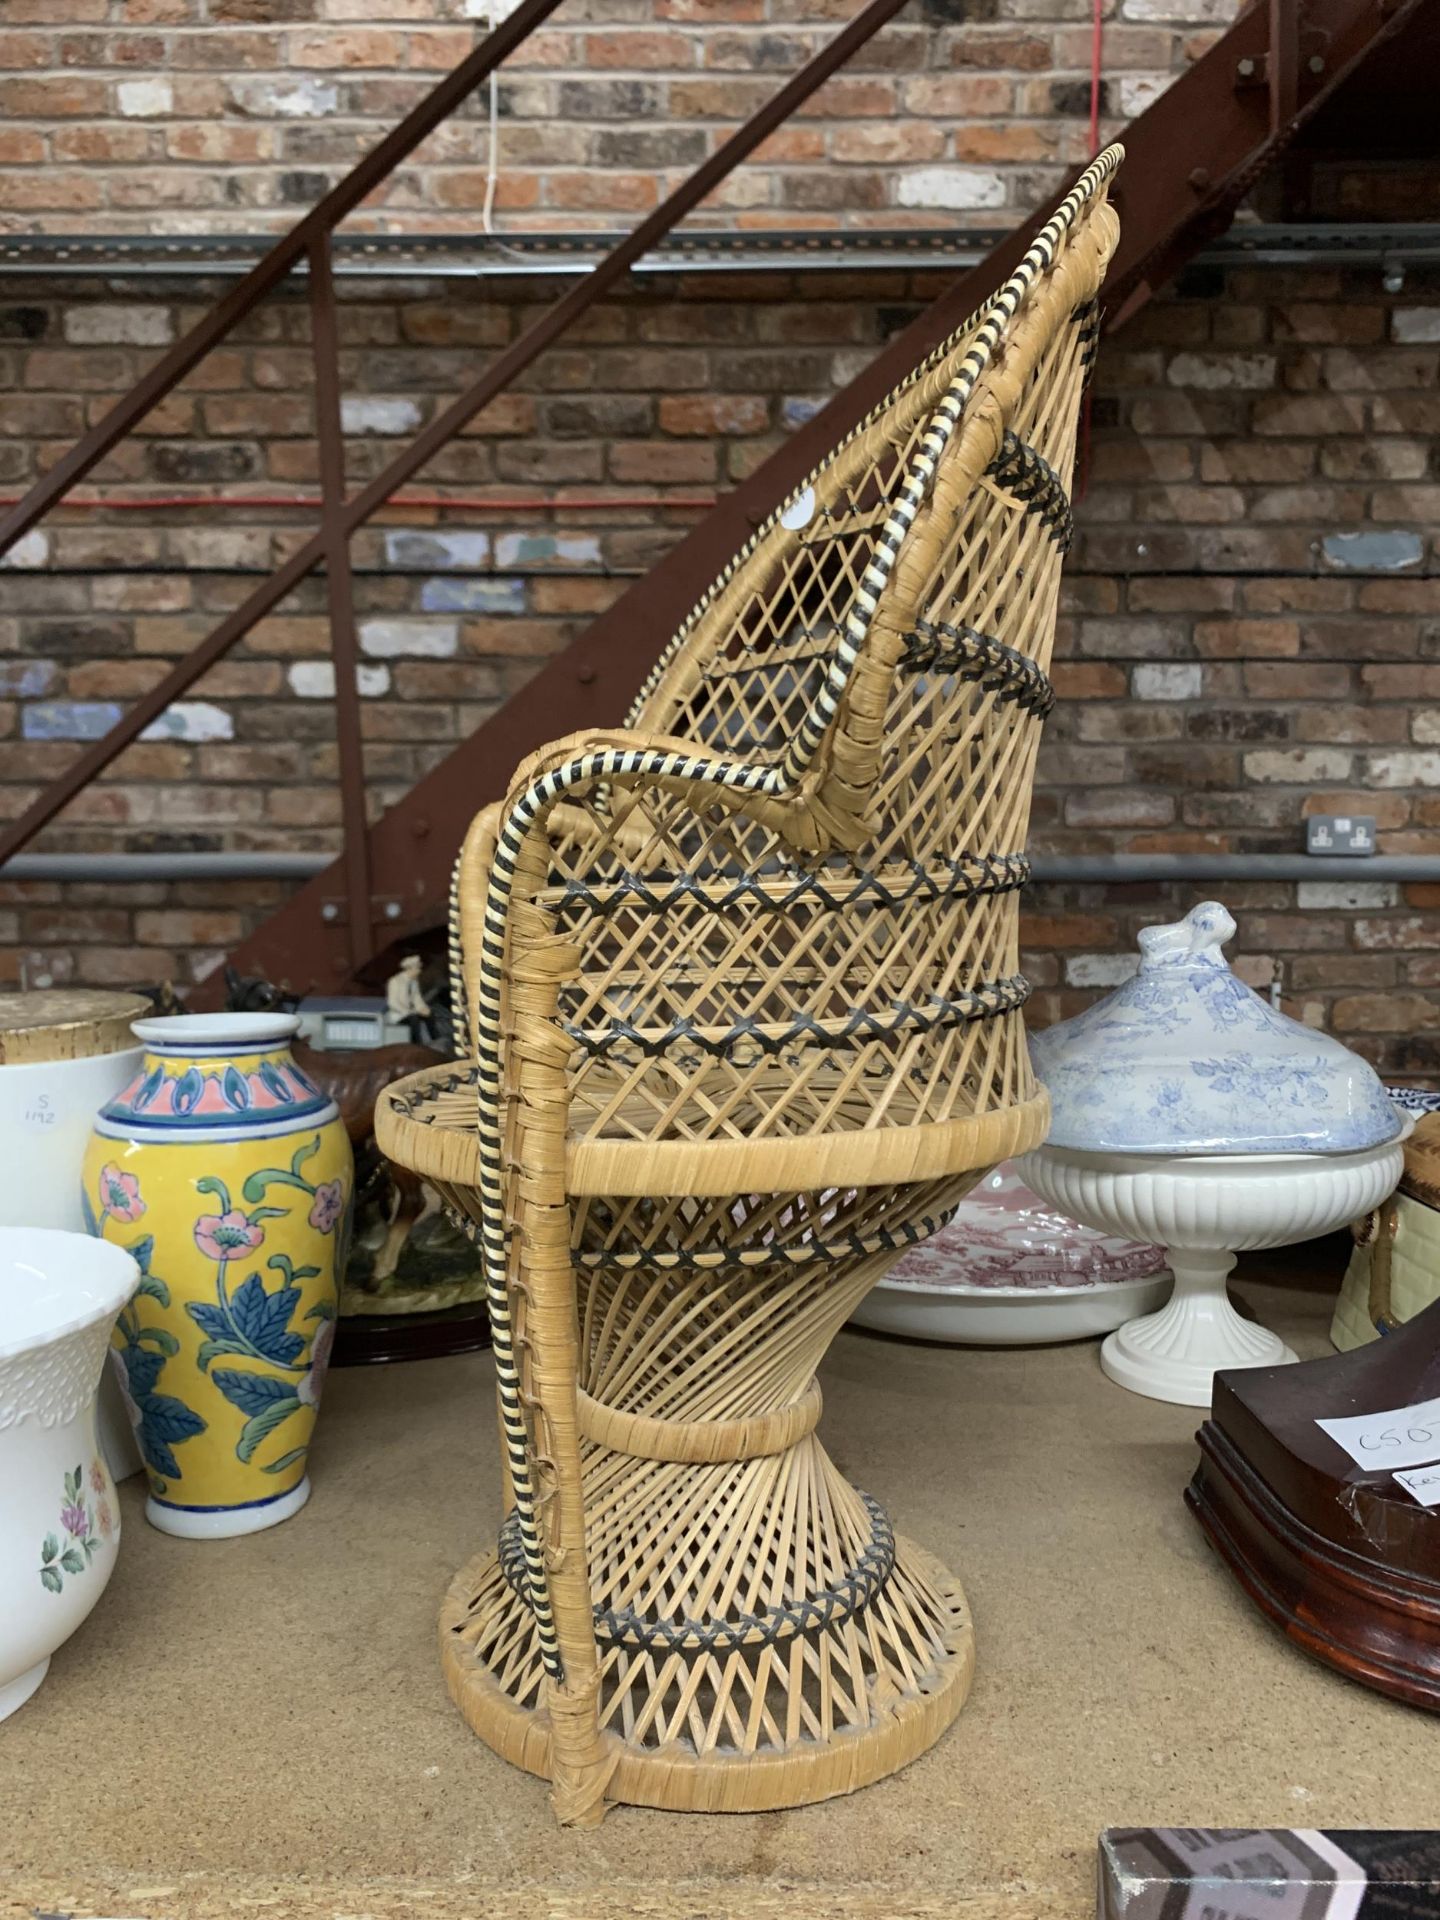 A MINIATURE WICKER 'PEACOCK' CHAIR - Image 2 of 2